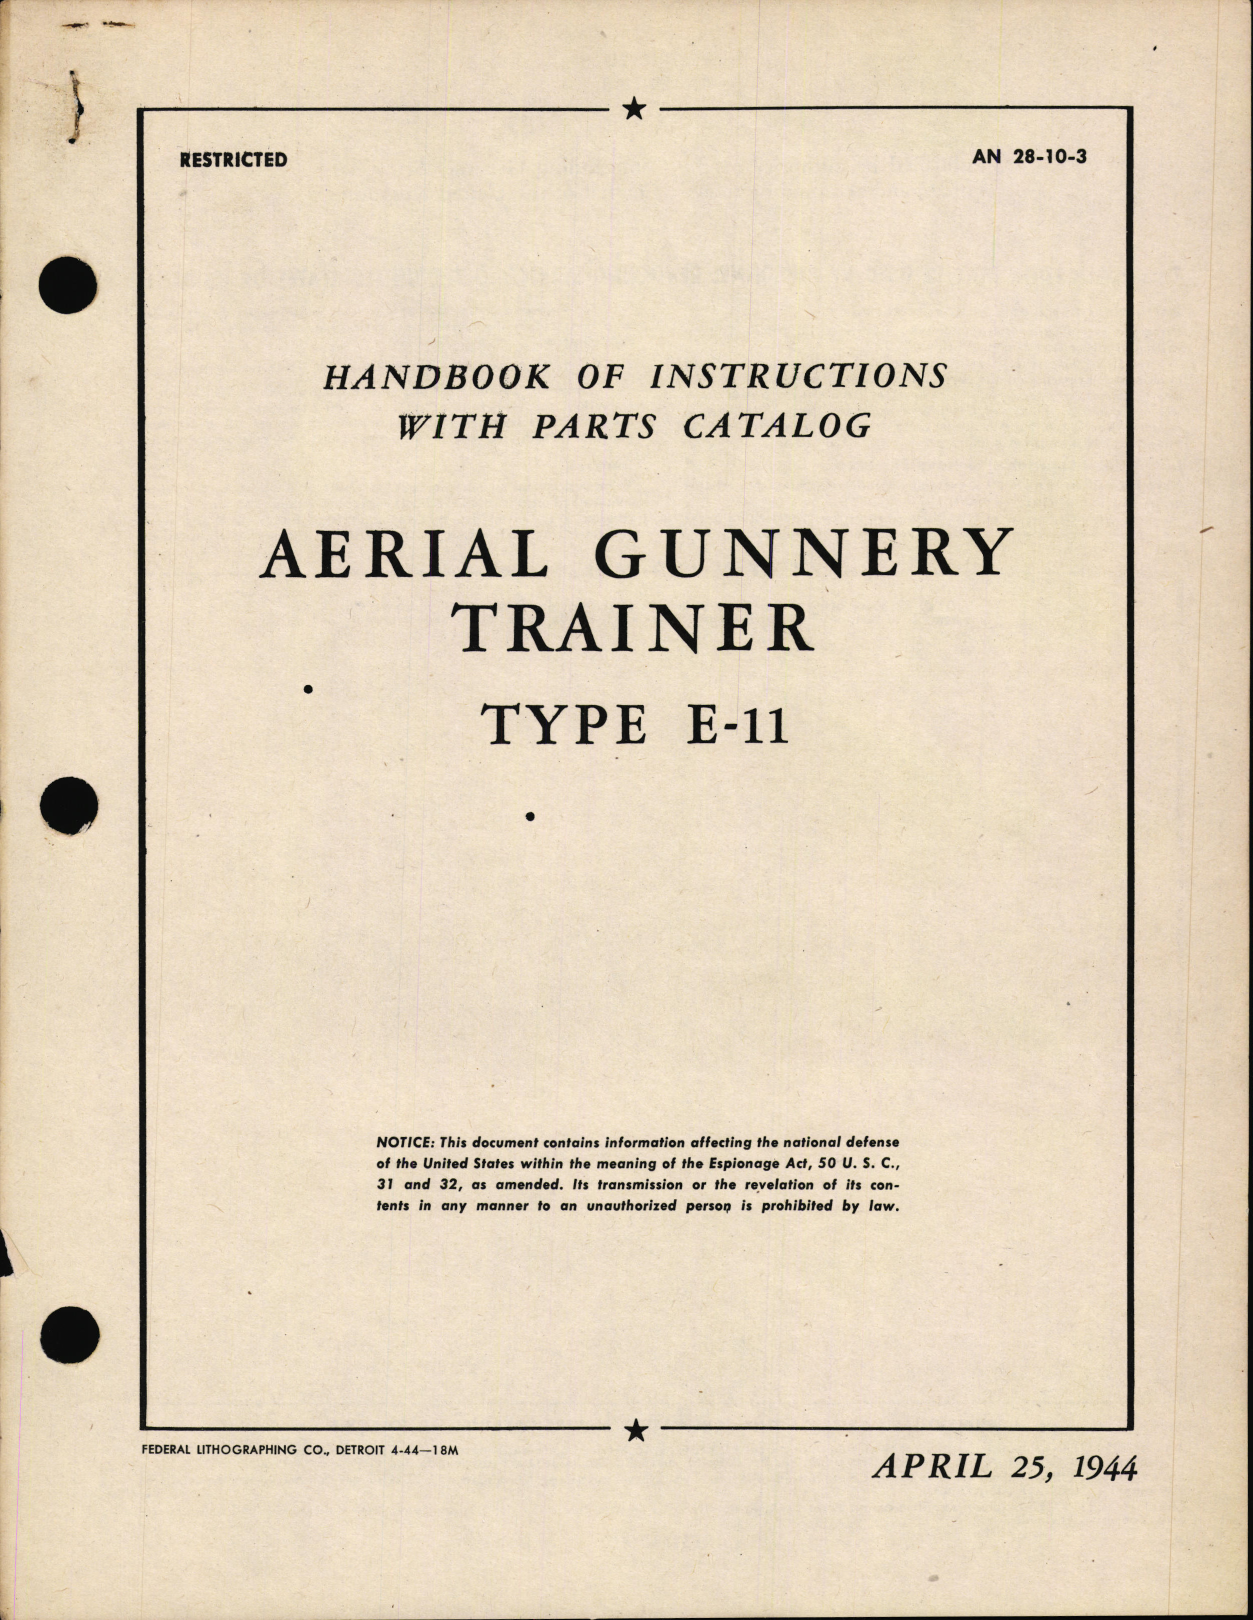 Sample page 1 from AirCorps Library document: Handbook of Instructions with Parts Catalog for Aerial Gunnery trainer Type E-11